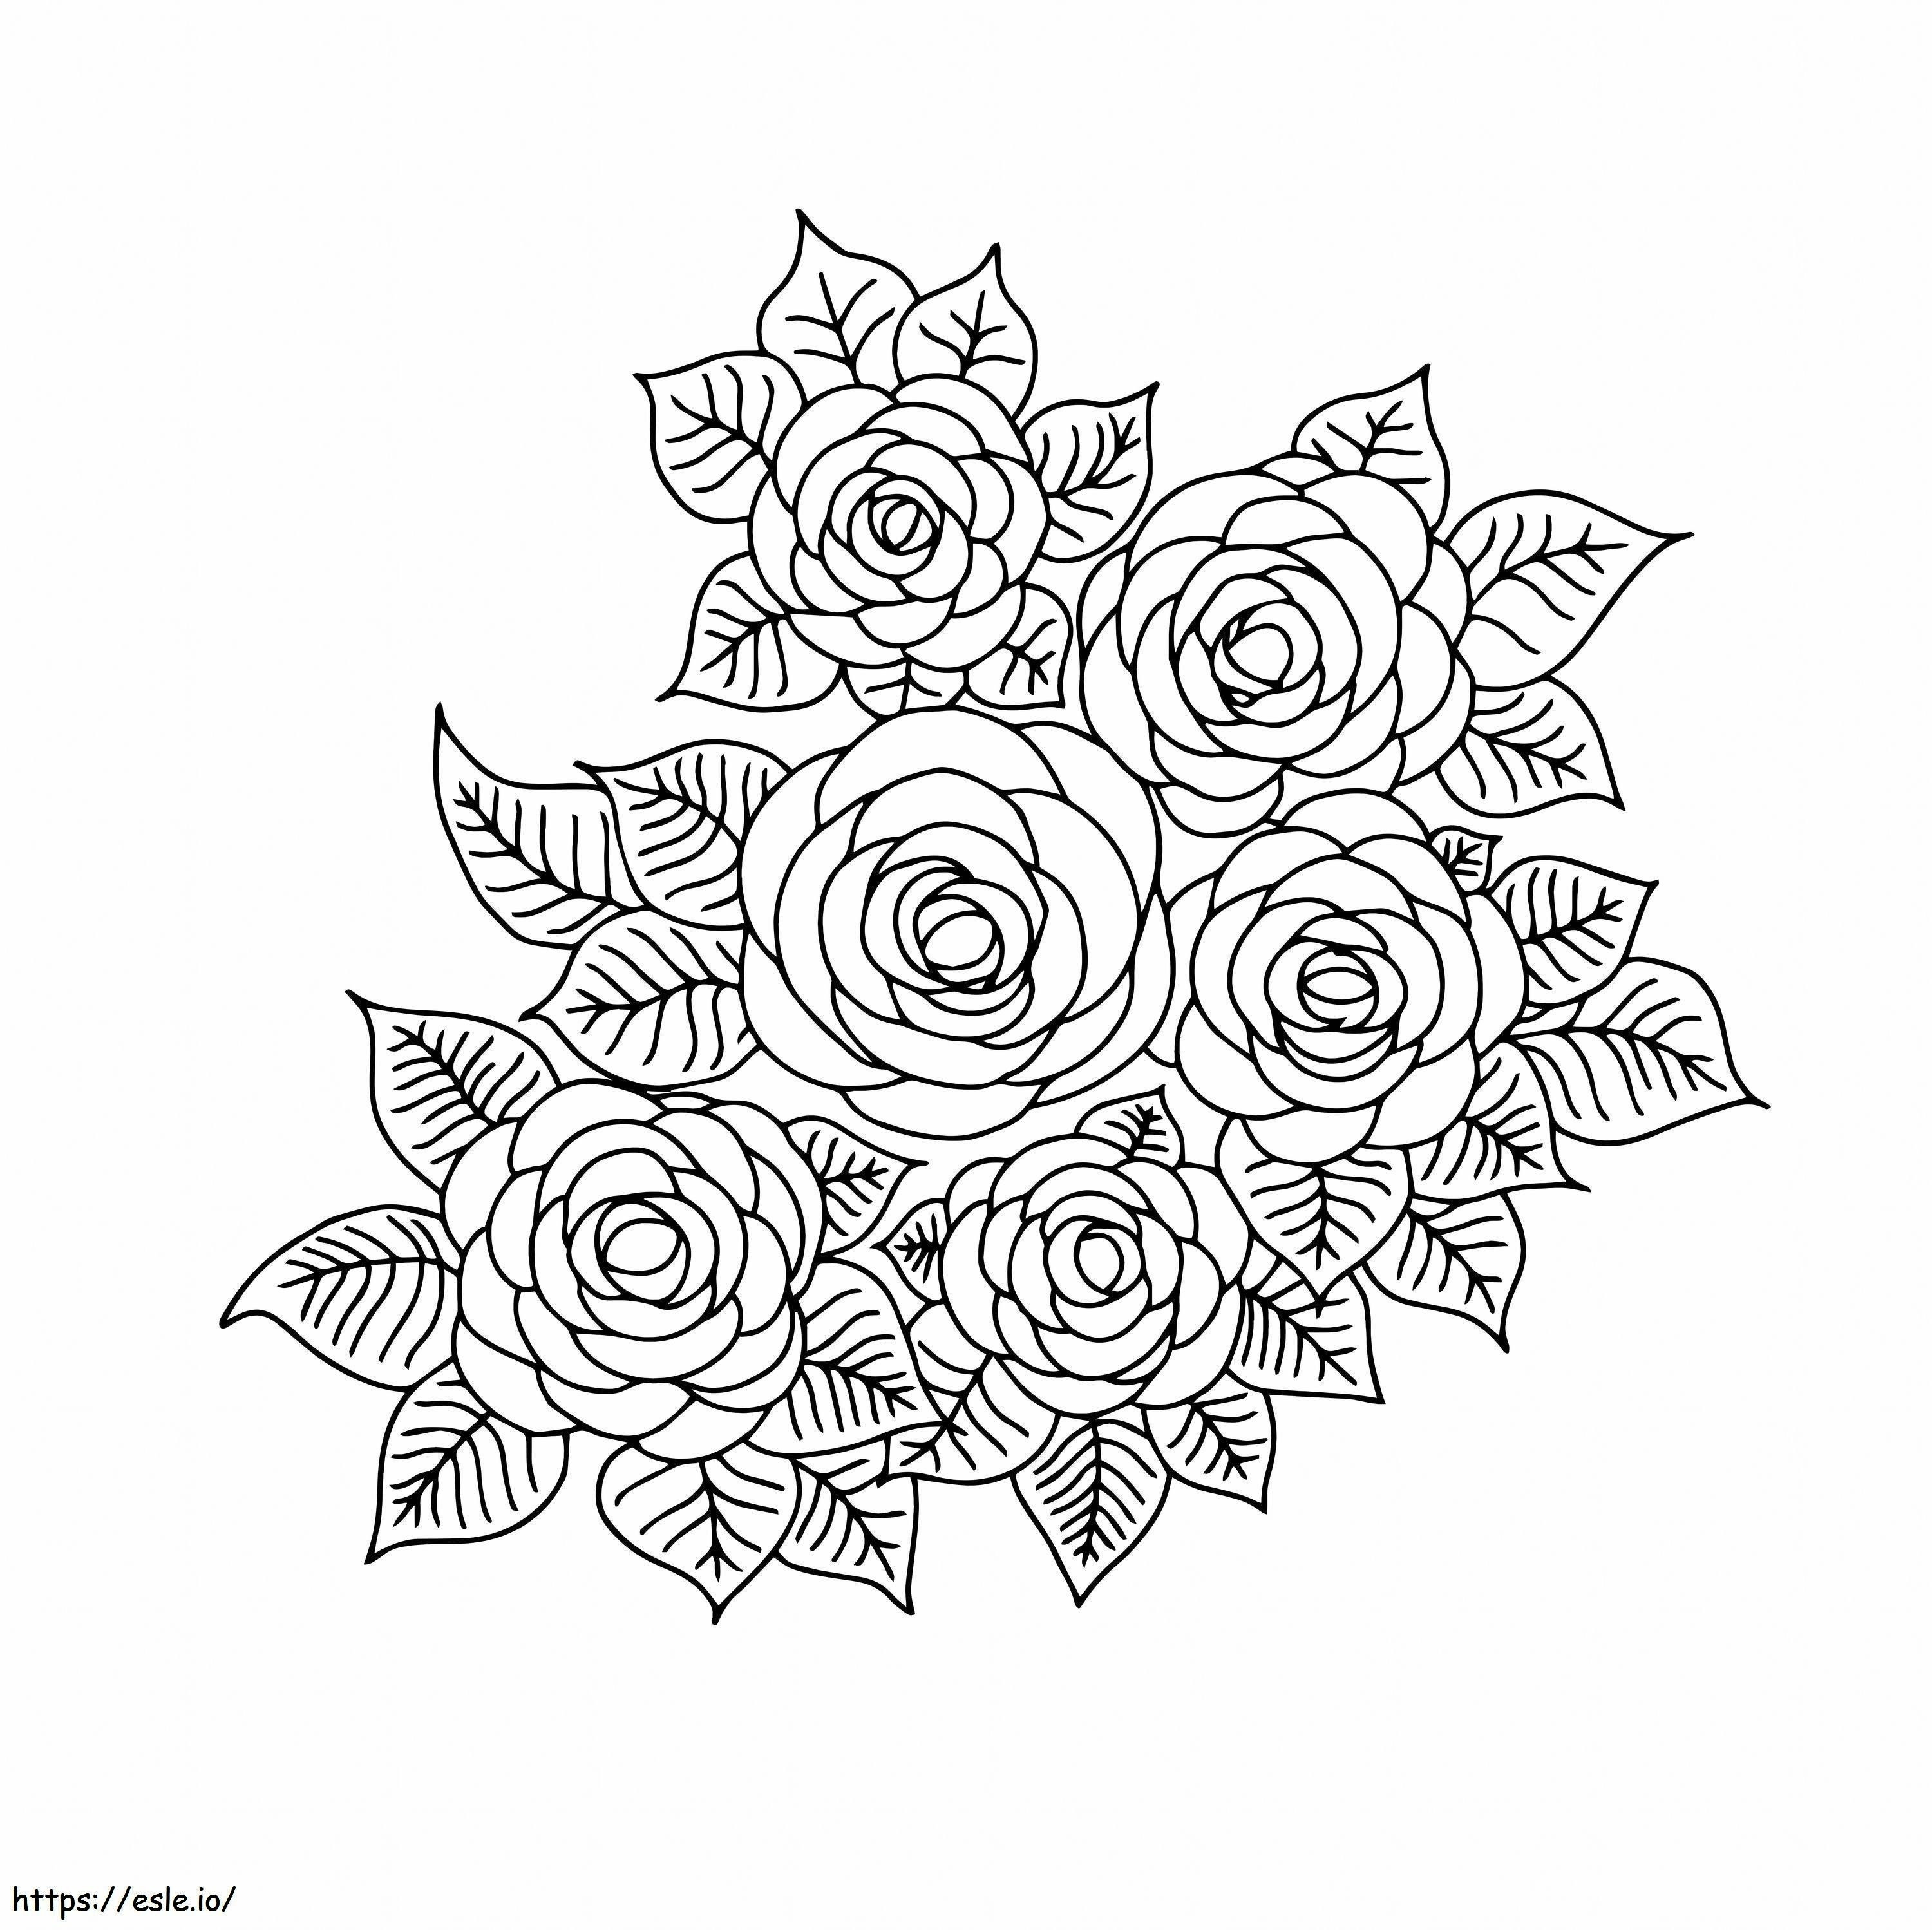 Roses With Leaves coloring page